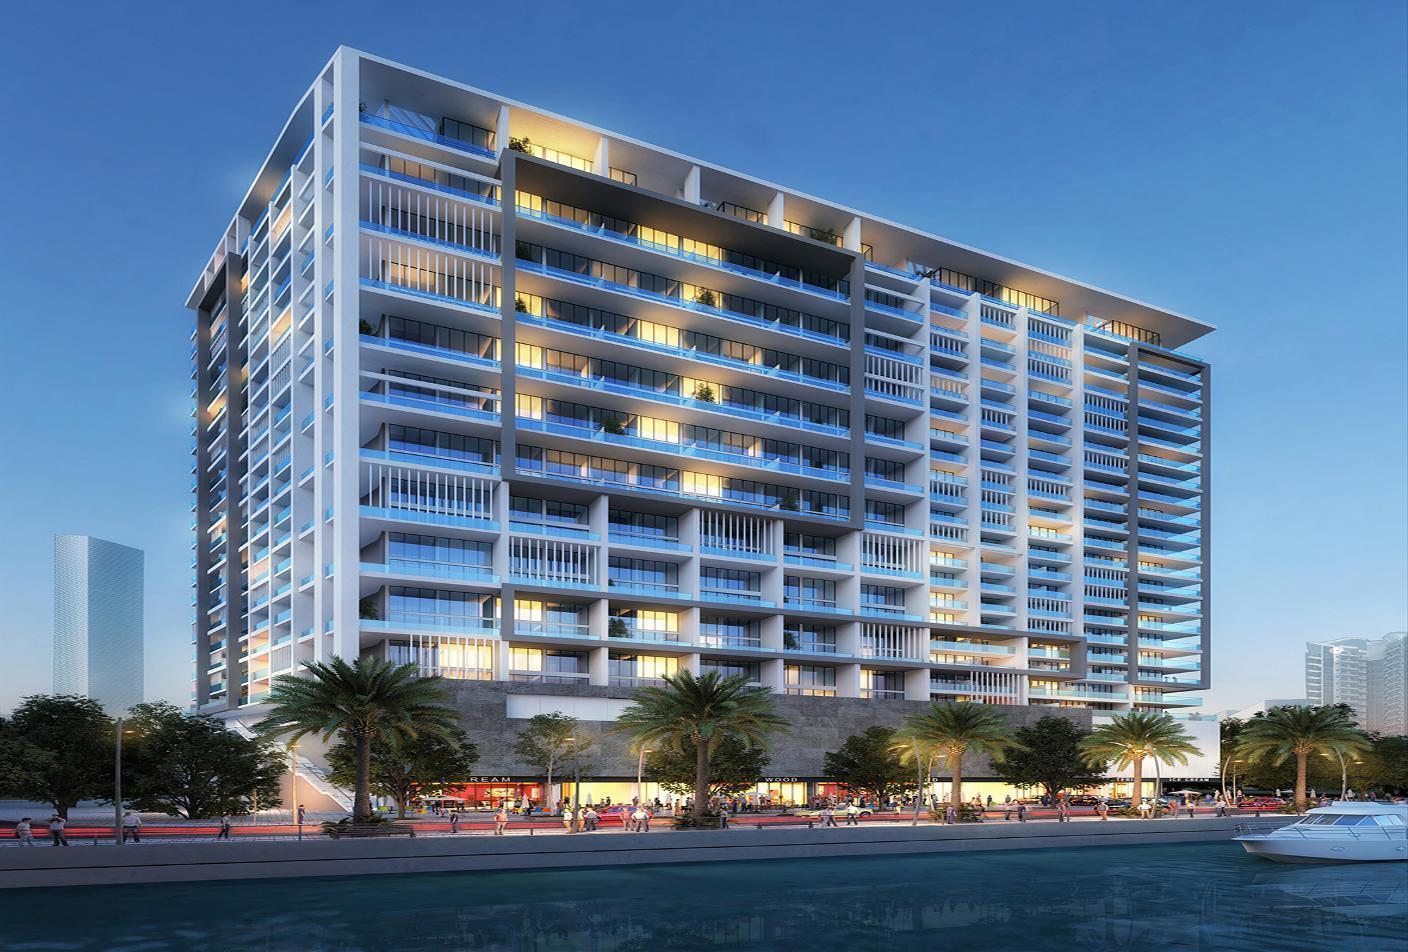 1 bed, 1 bath Hotel & Hotel Apartment for sale in Al Maryah Island, Abu Dhabi for price AED 690000 